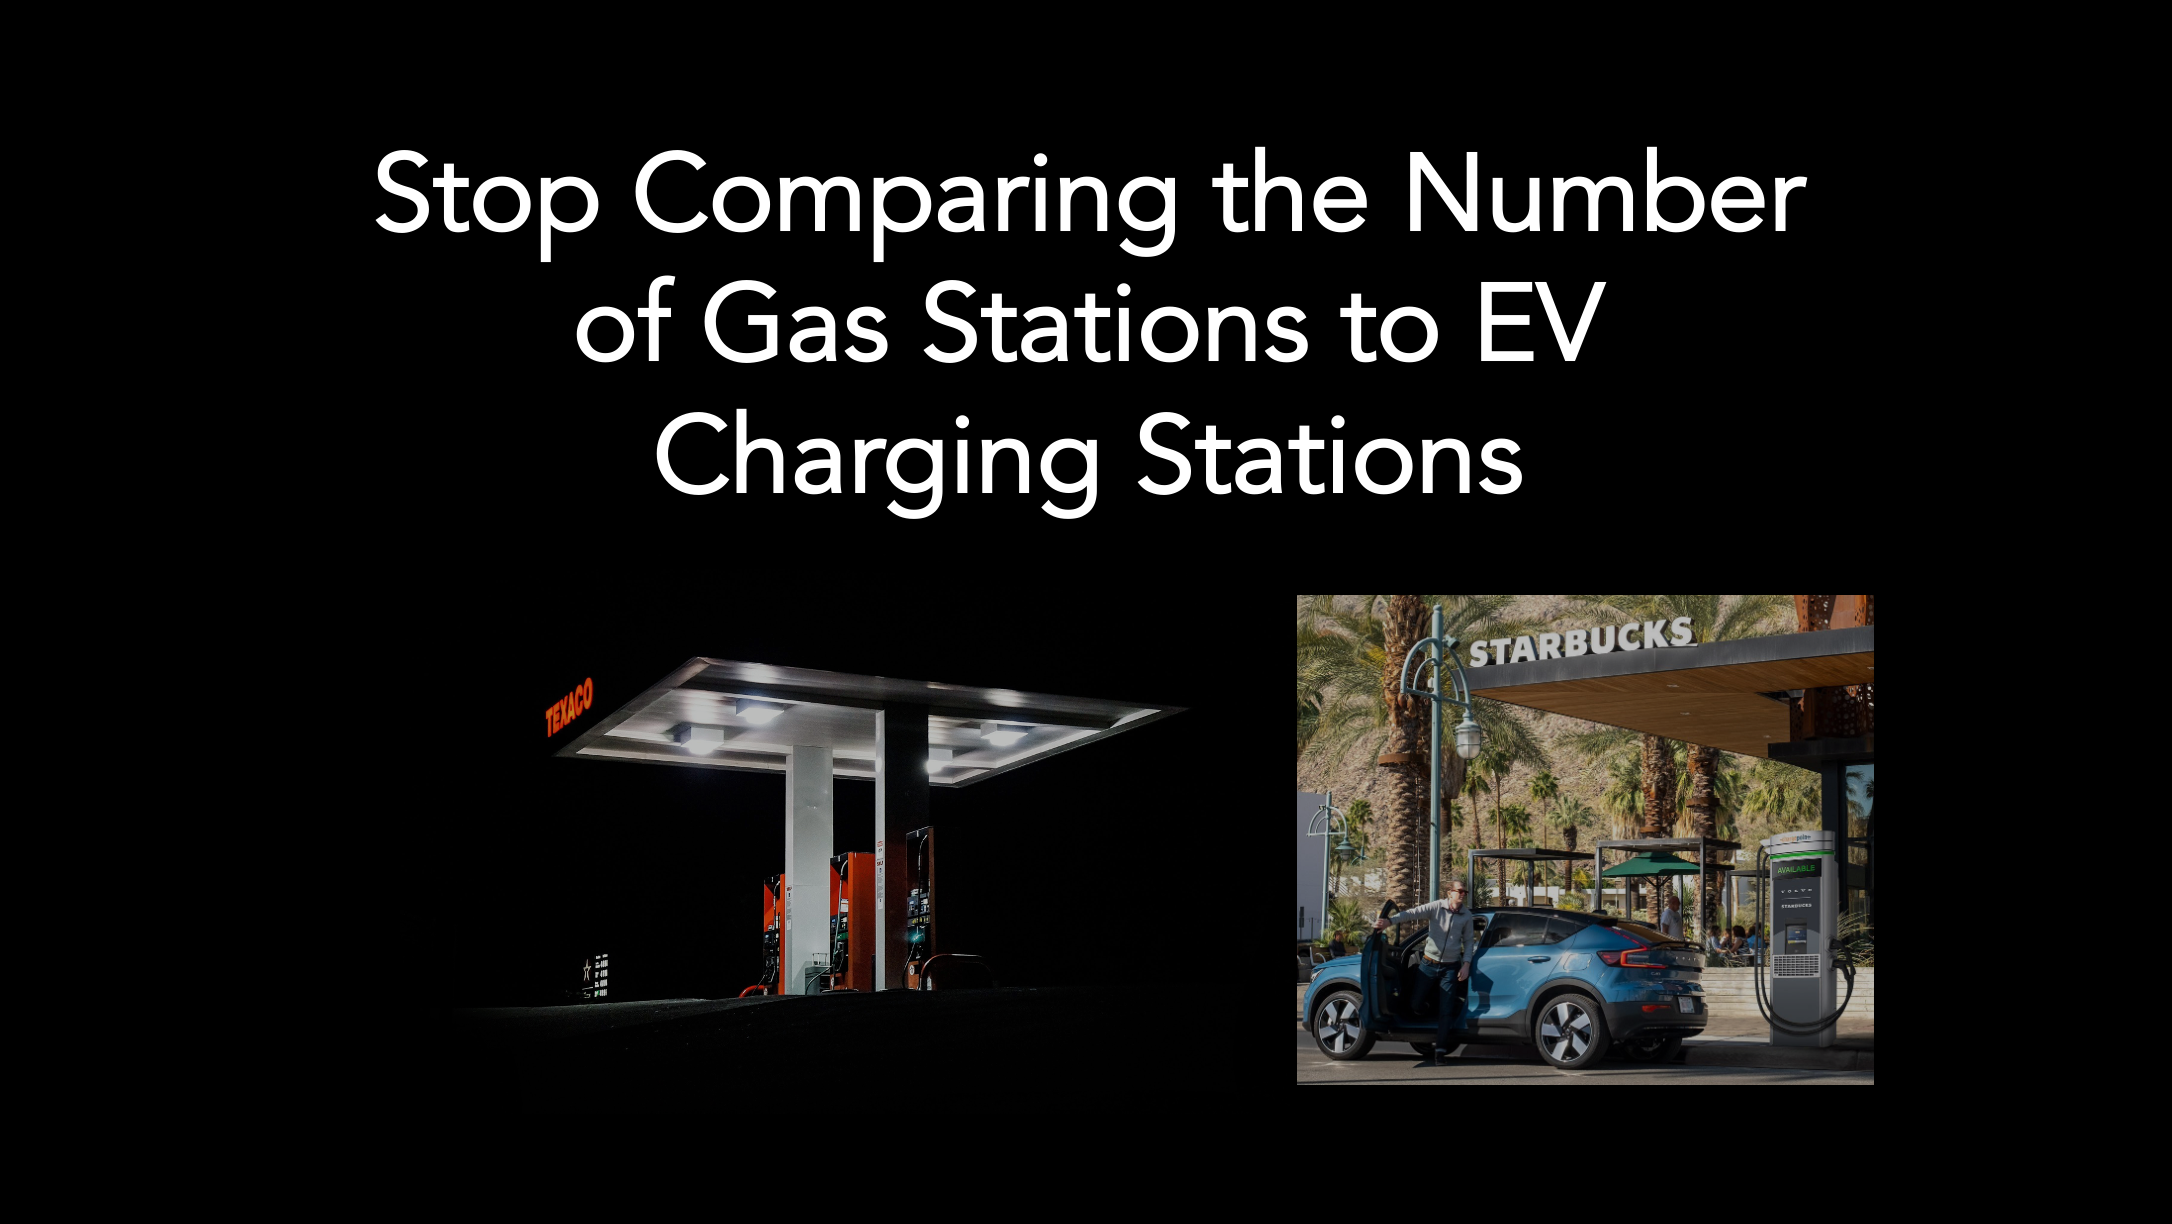 Don't compare gas stations and EV charging stations